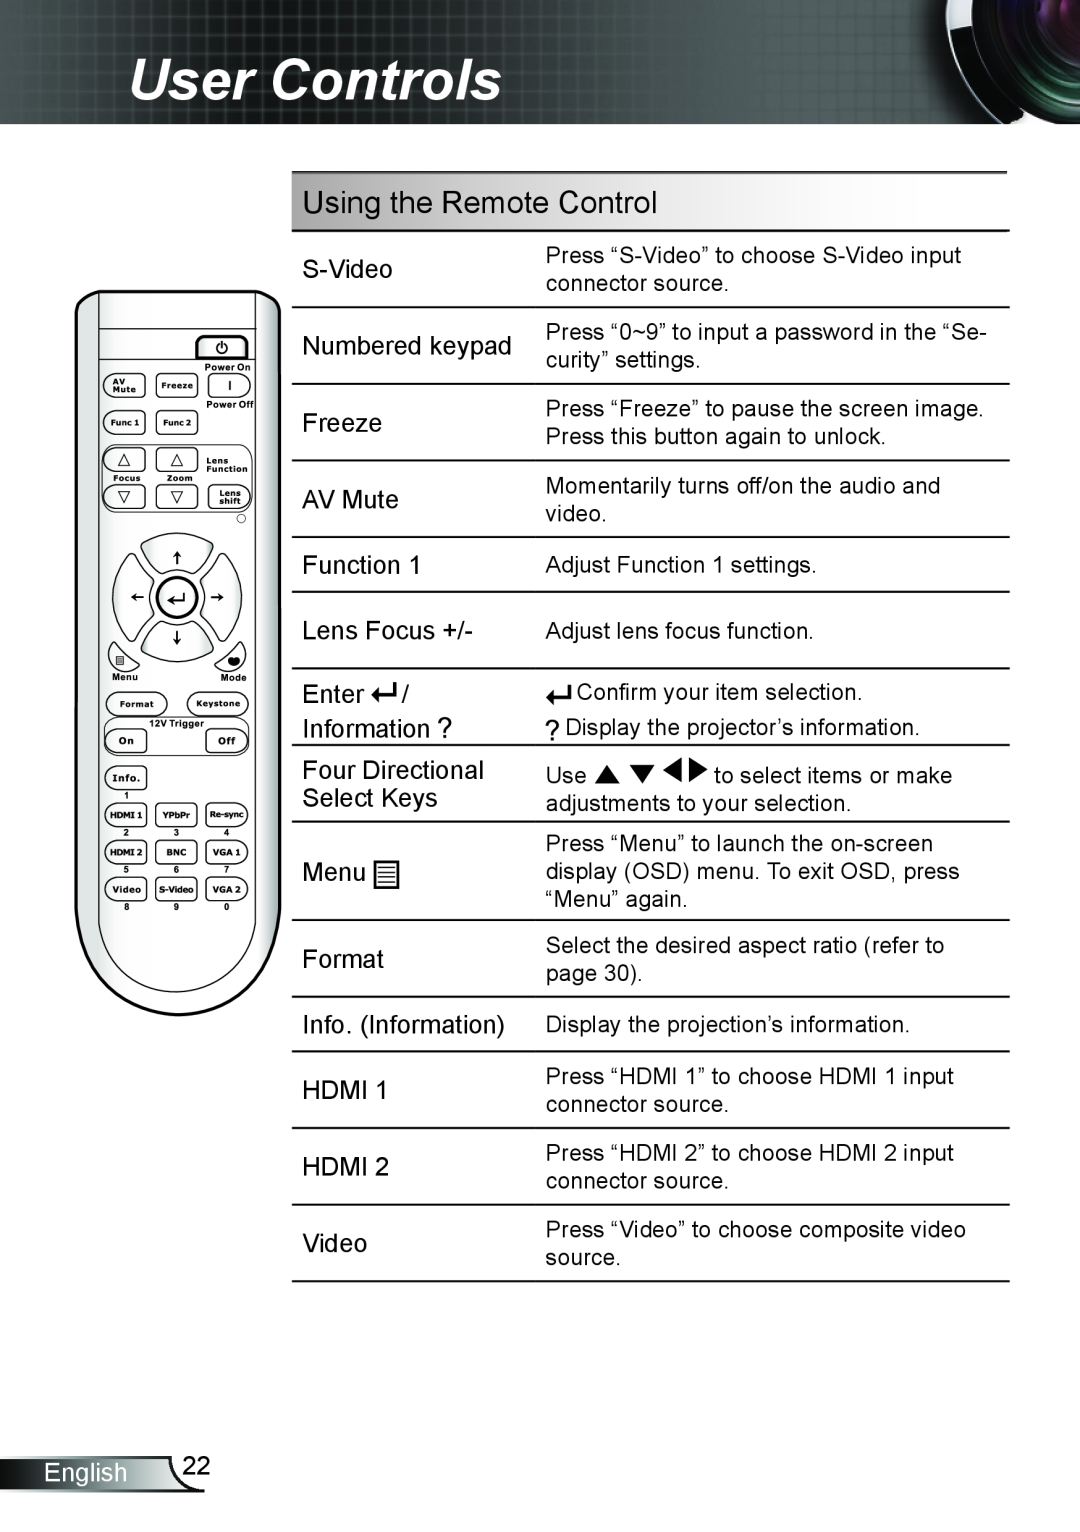 Optoma Technology TH7500NL manual User Controls, Using the Remote Control, English 